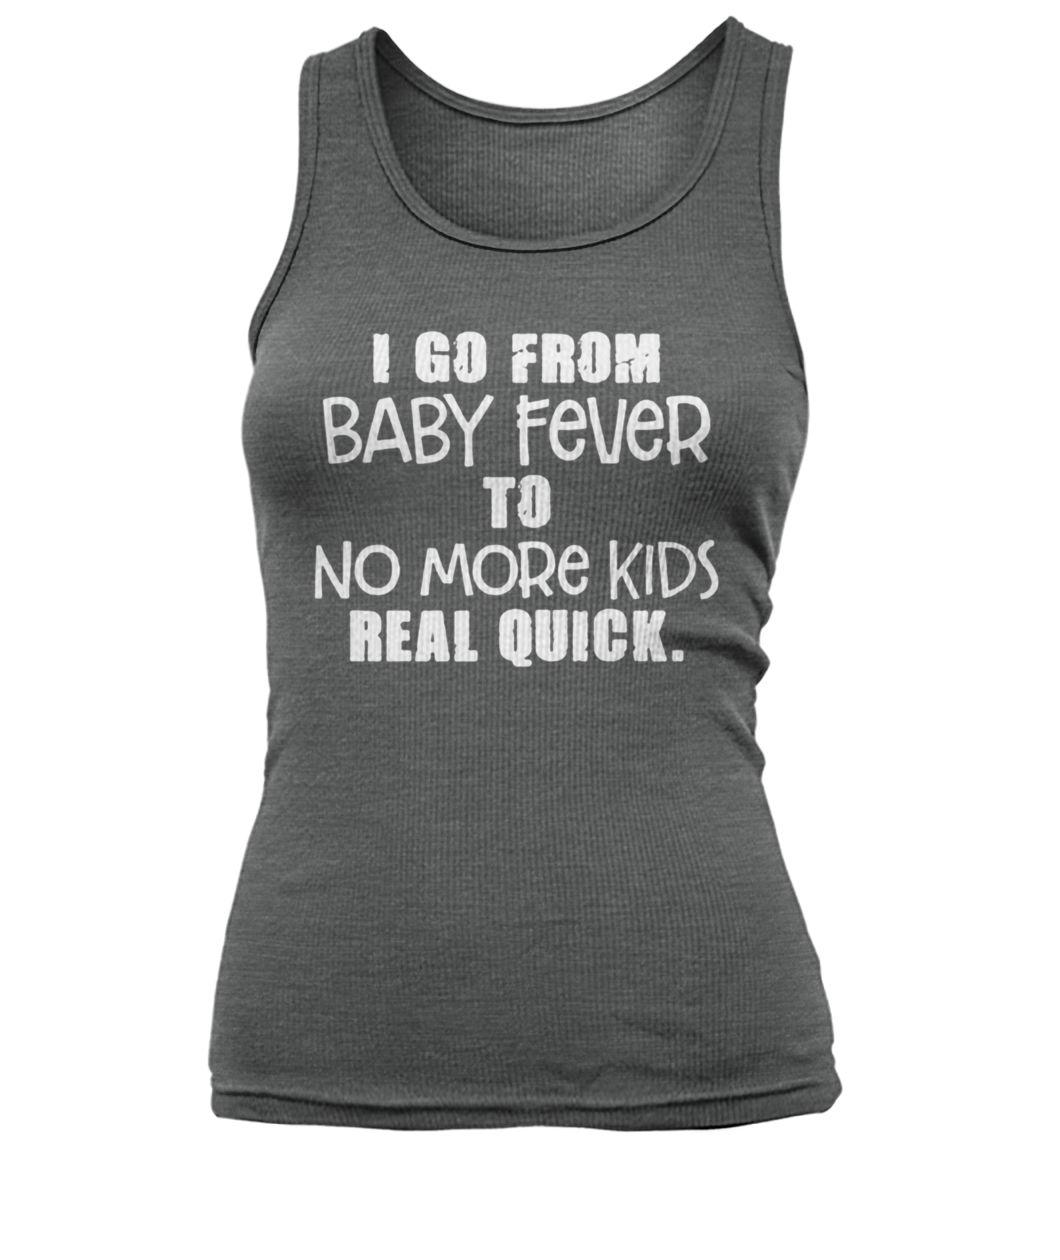 I go from baby fever to no more kids real quick men's tank top